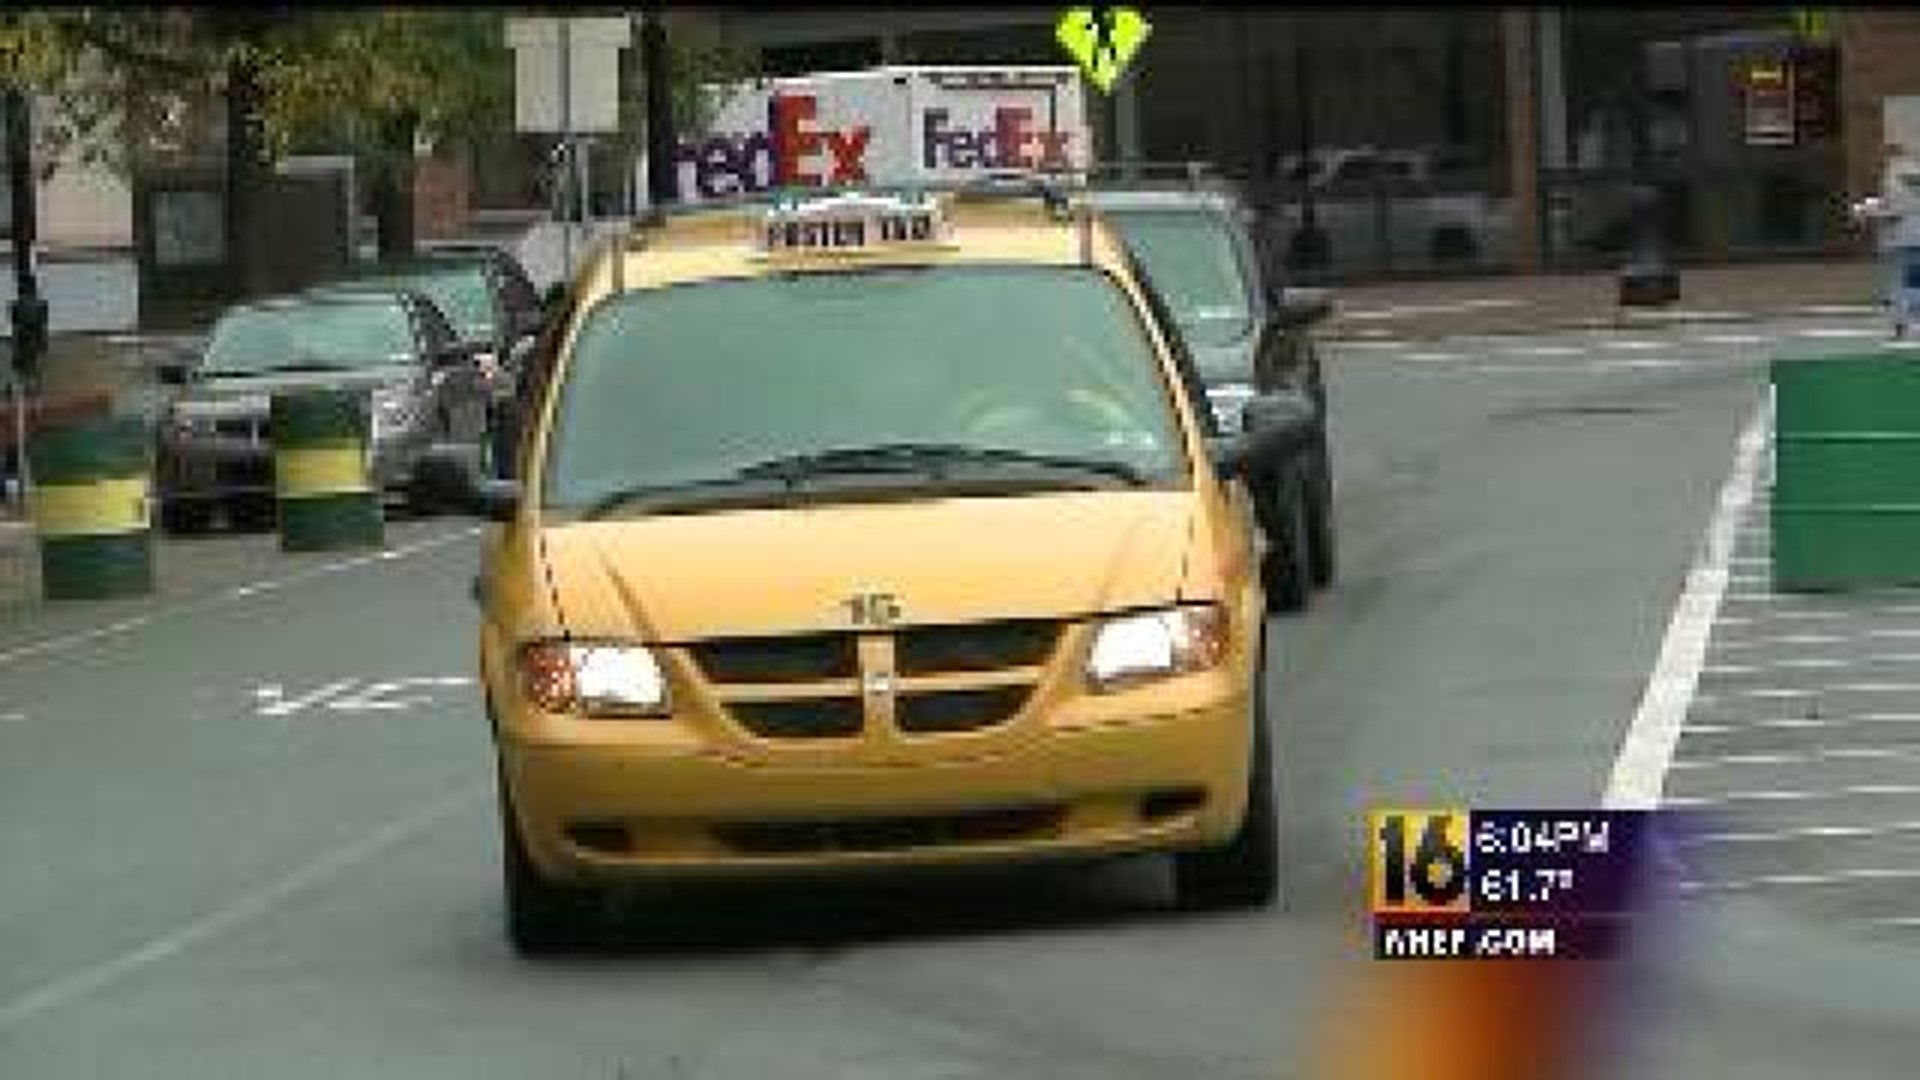 Cab Company Closes After 100 Years